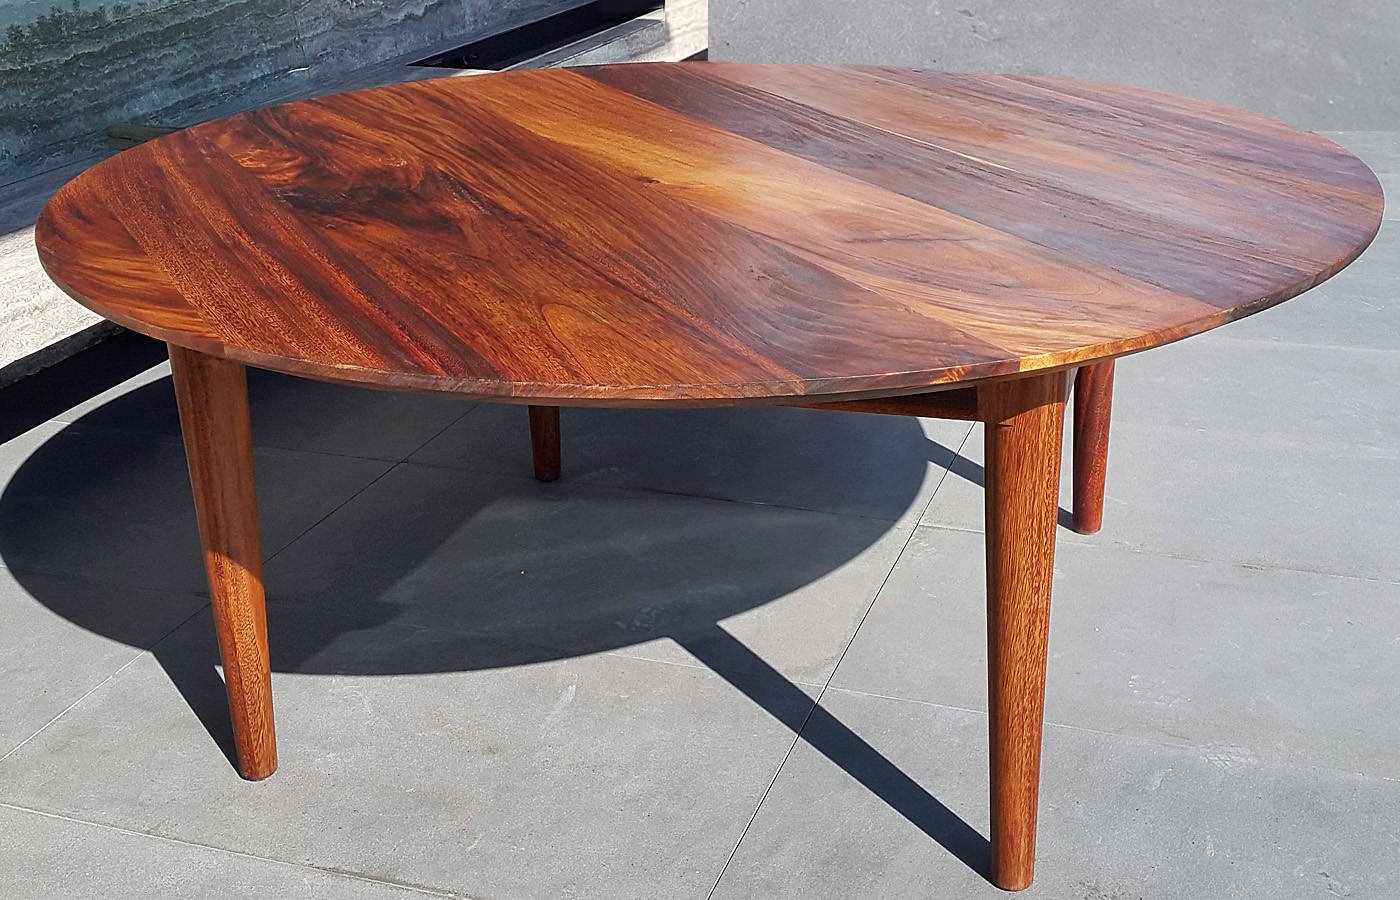 Calculate The Best Dining Table Size, 8 Foot Round Table Is How Many Inches